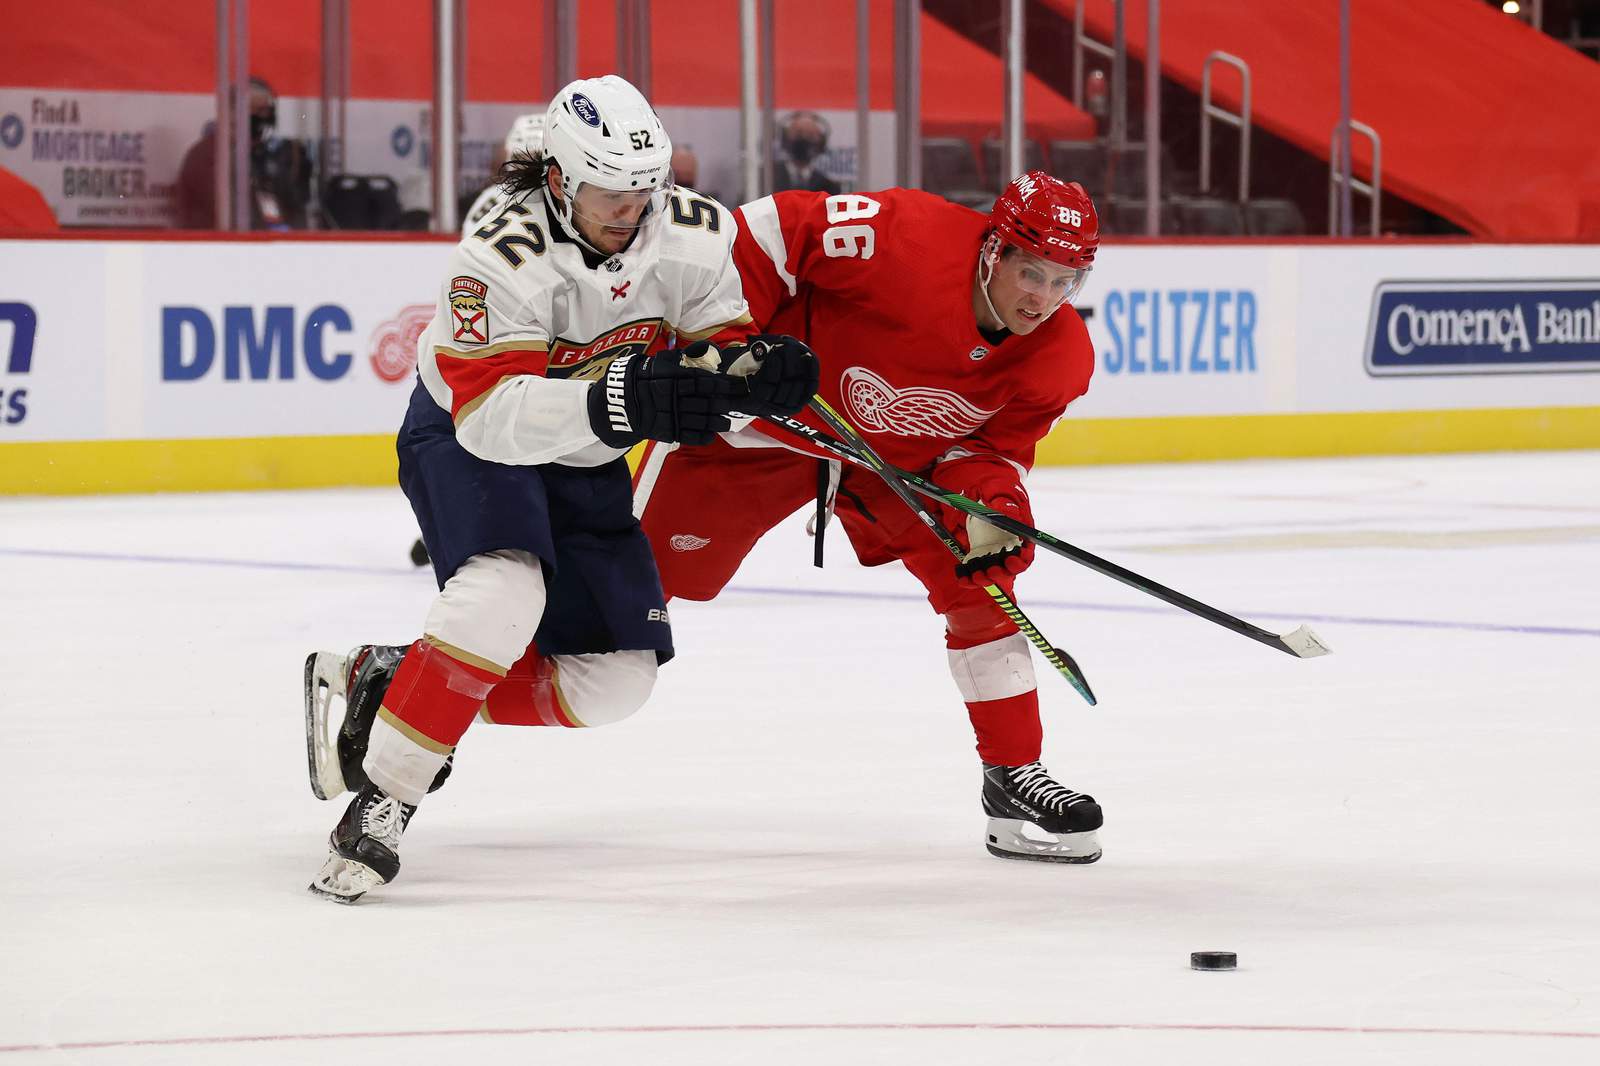 Heponiemi lifts Panthers to 3-2 win over Red Wings in debut